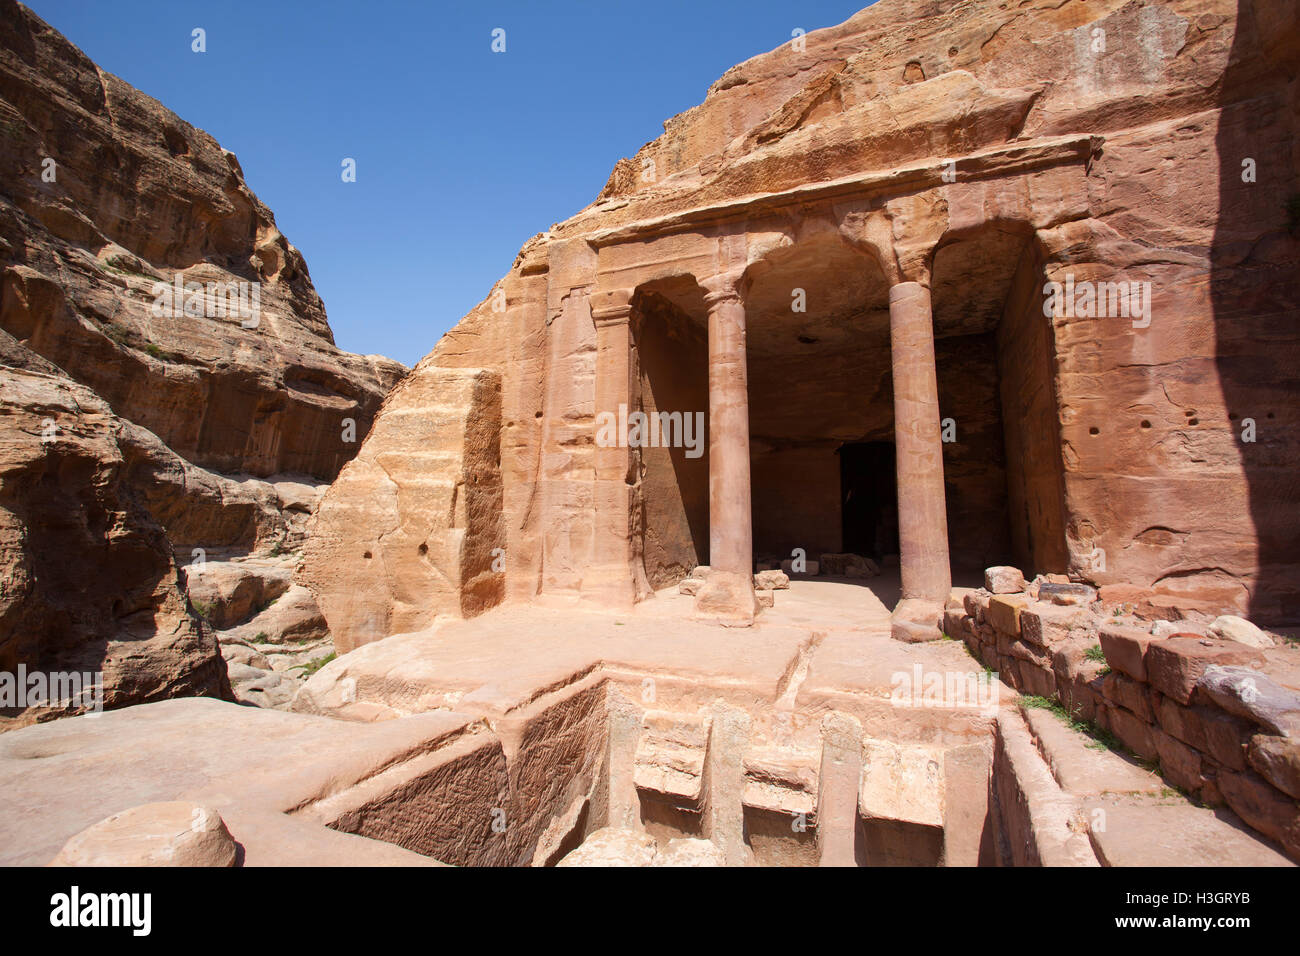 The 'Garden Tomb' inside the lost city of Petra, Jordan, Middle East. Stock Photo